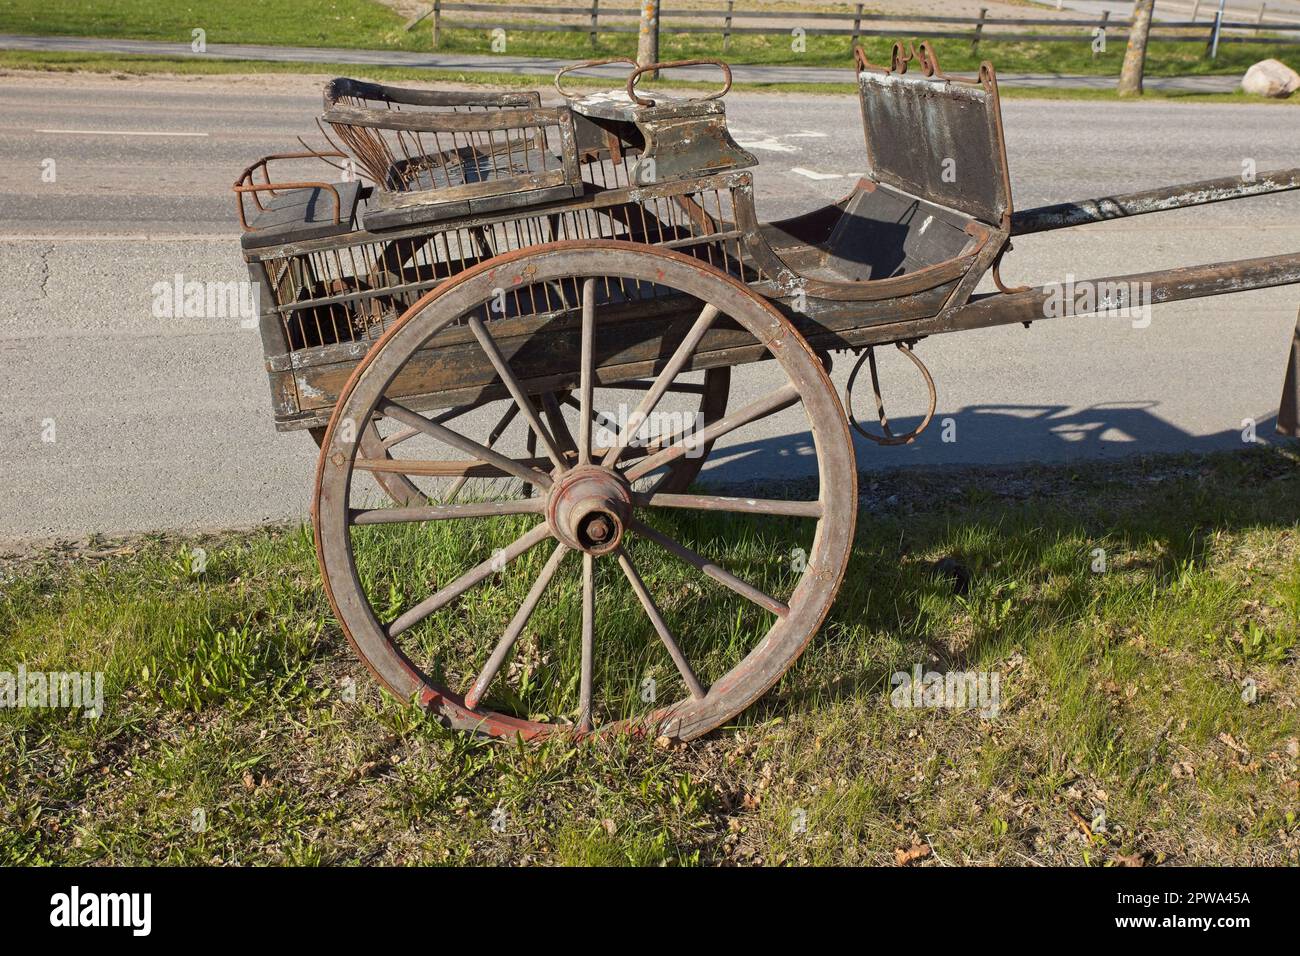 Old Wooden Two Wheeled Horse Wagon Used For Transportation Of Goods And